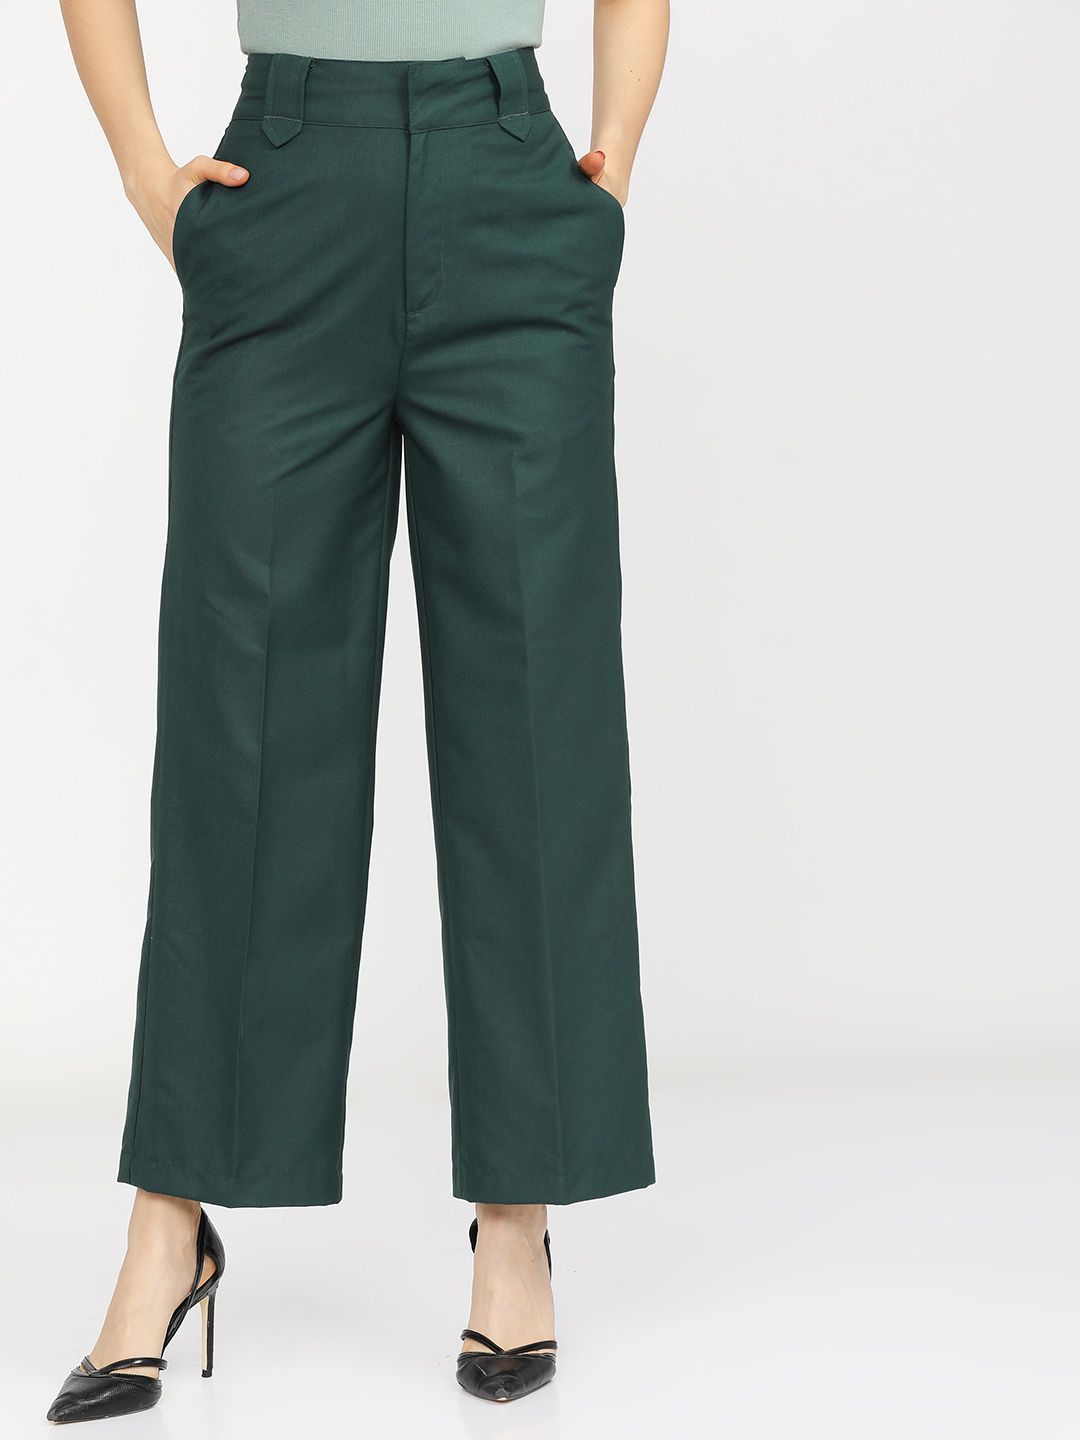 Tokyo Talkies Women Green Flared Parallel Trousers Price in India